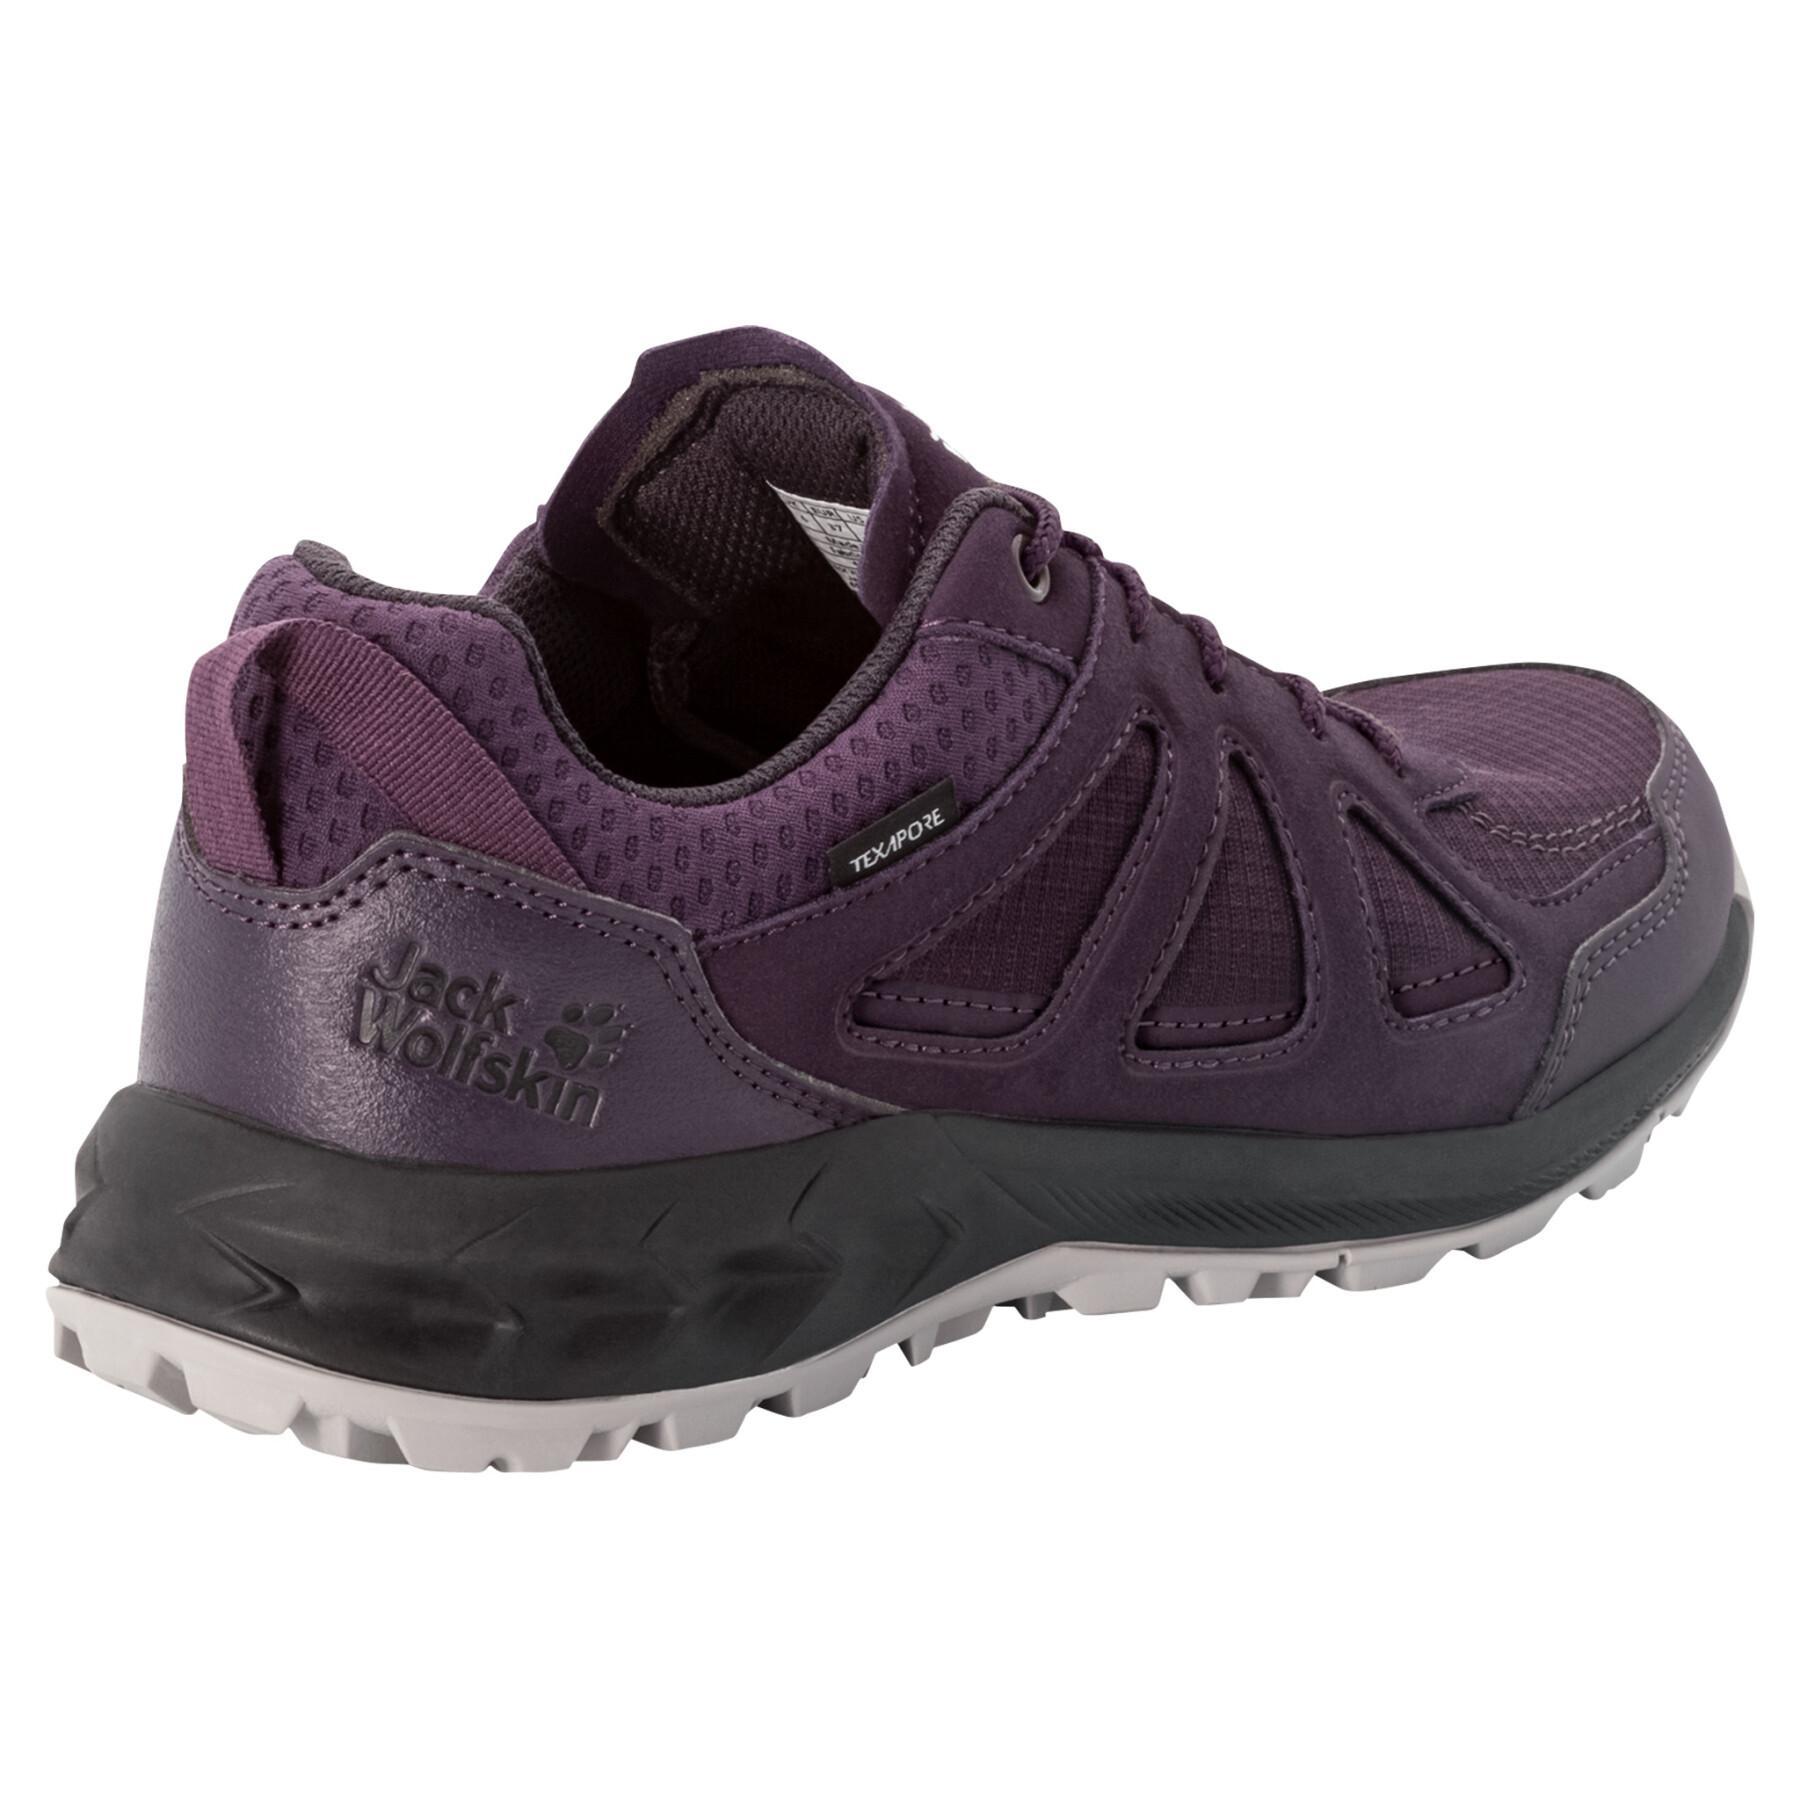 Women's hiking shoes Jack Wolfskin Woodland 2 Texapore Low